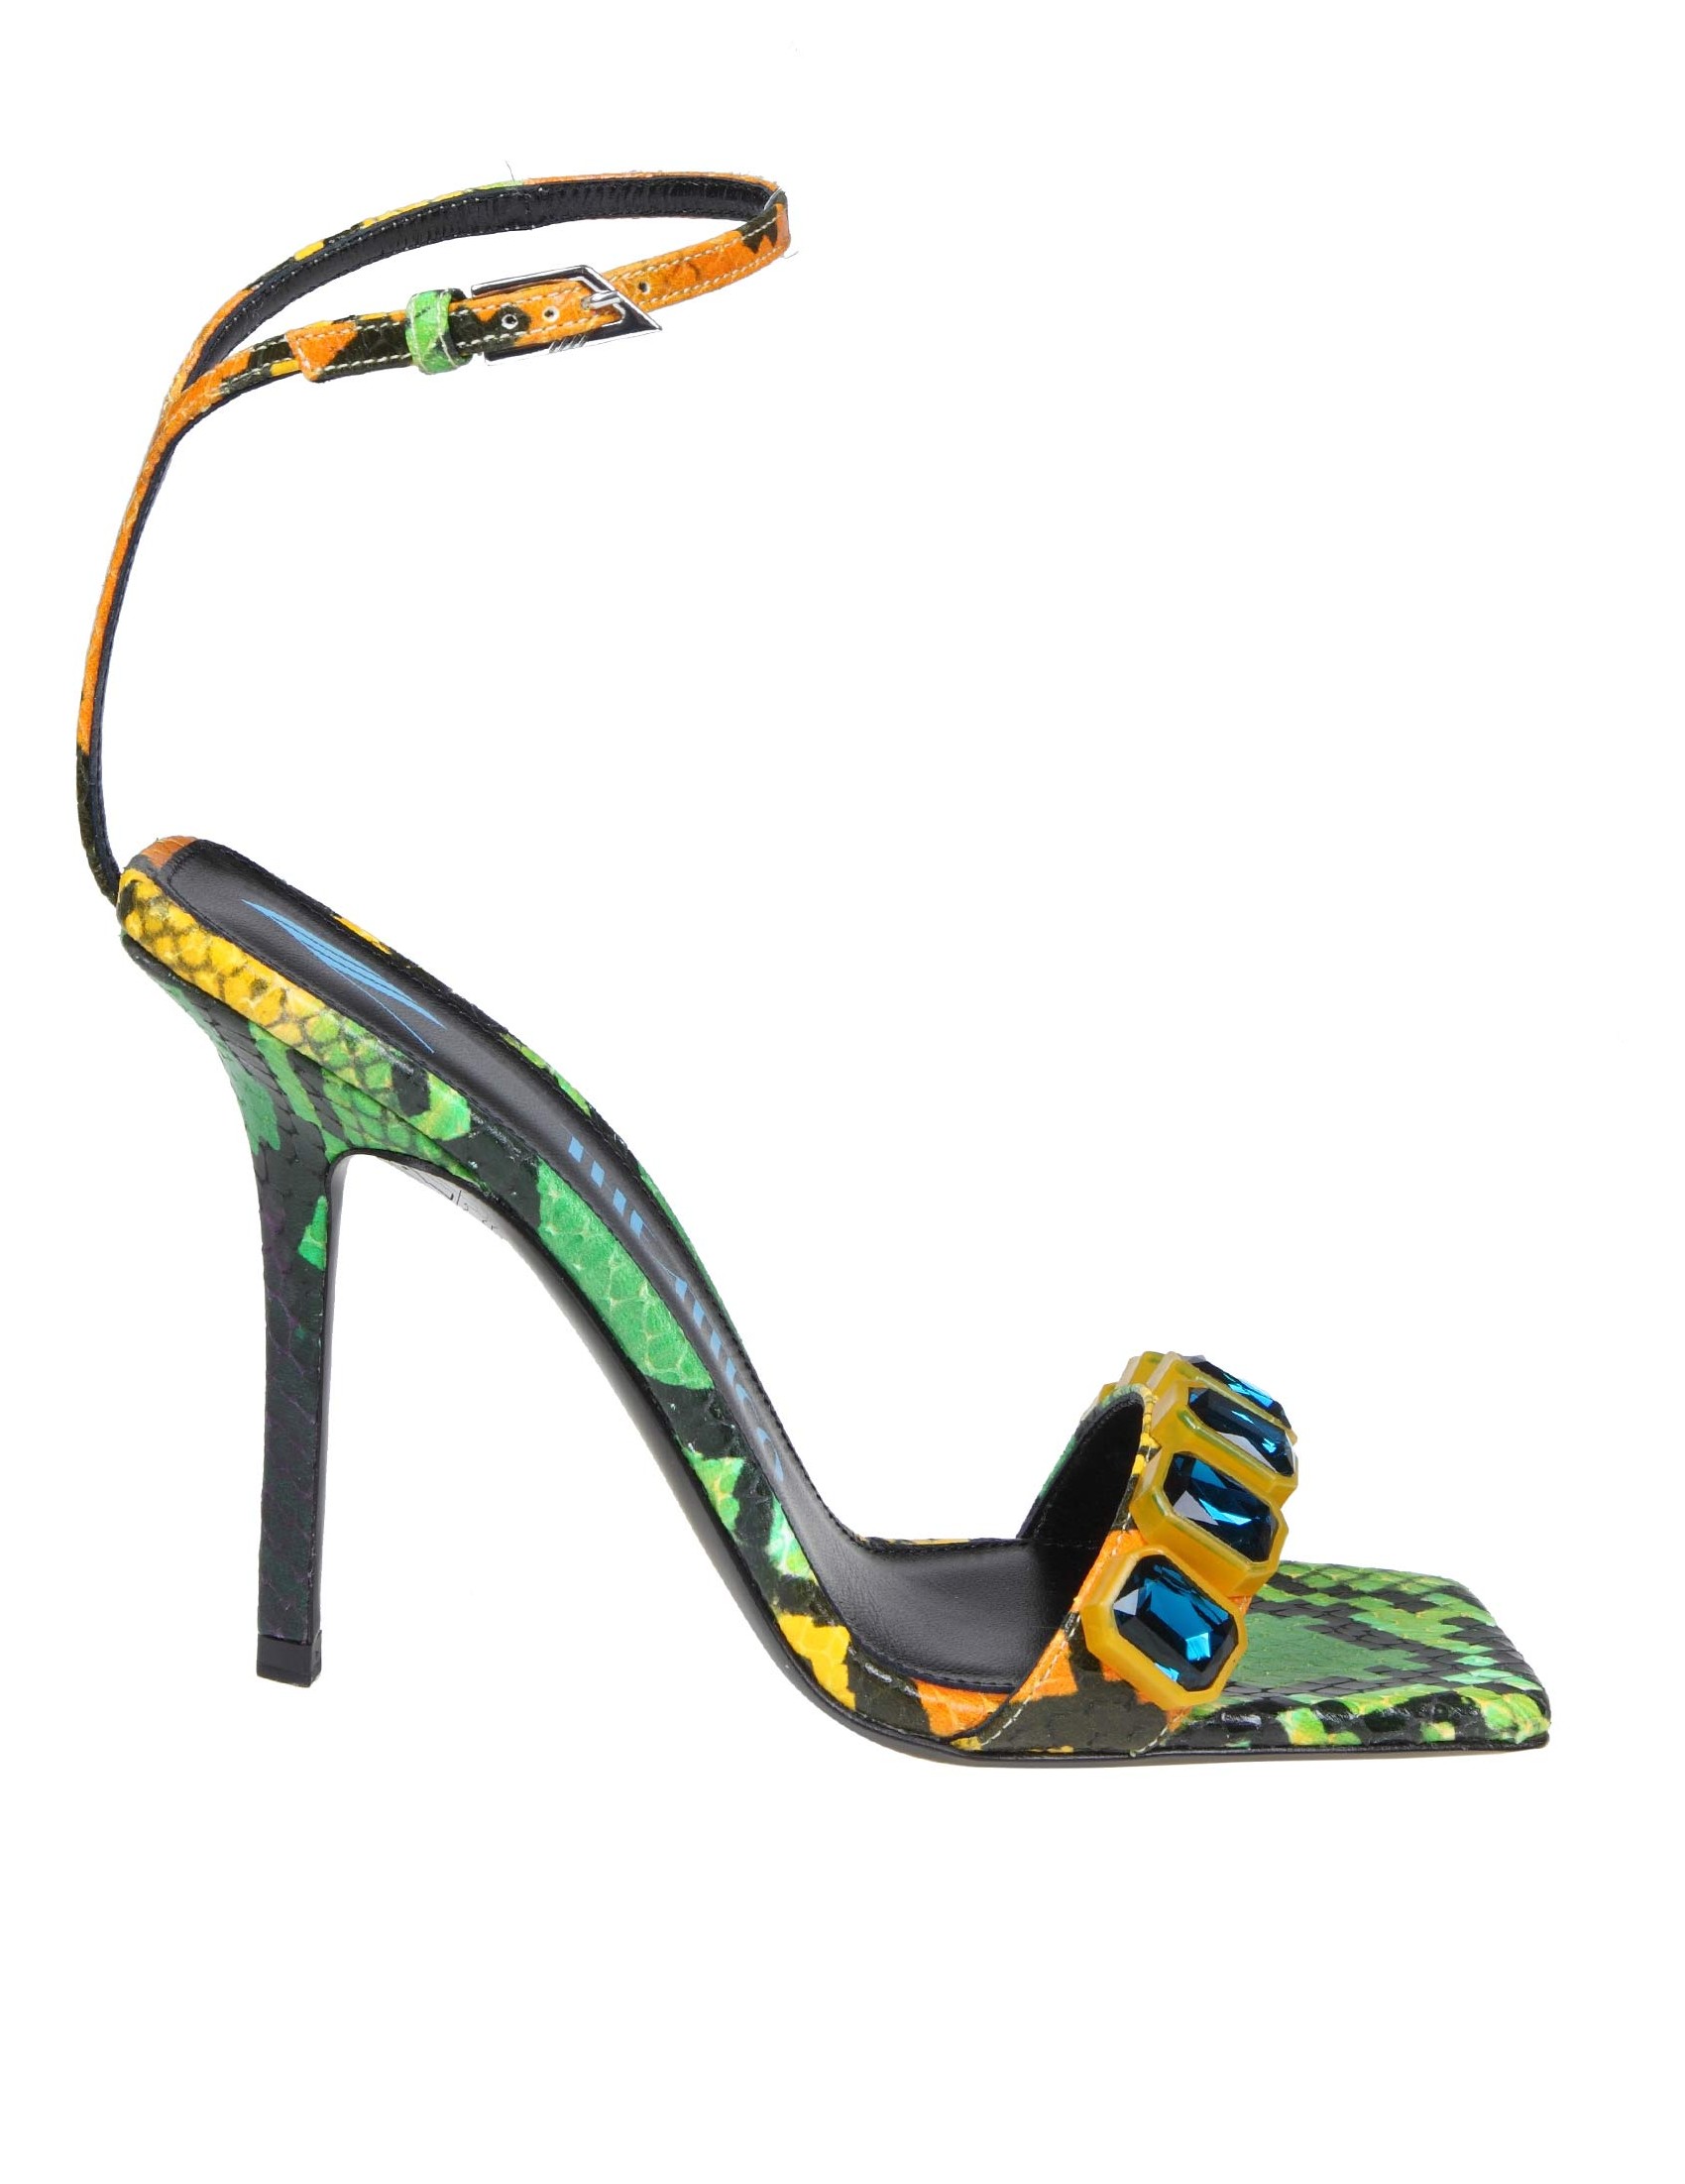 THE ATTICO SIENNA SANDALS IN PYTHON PRINTED LEATHER